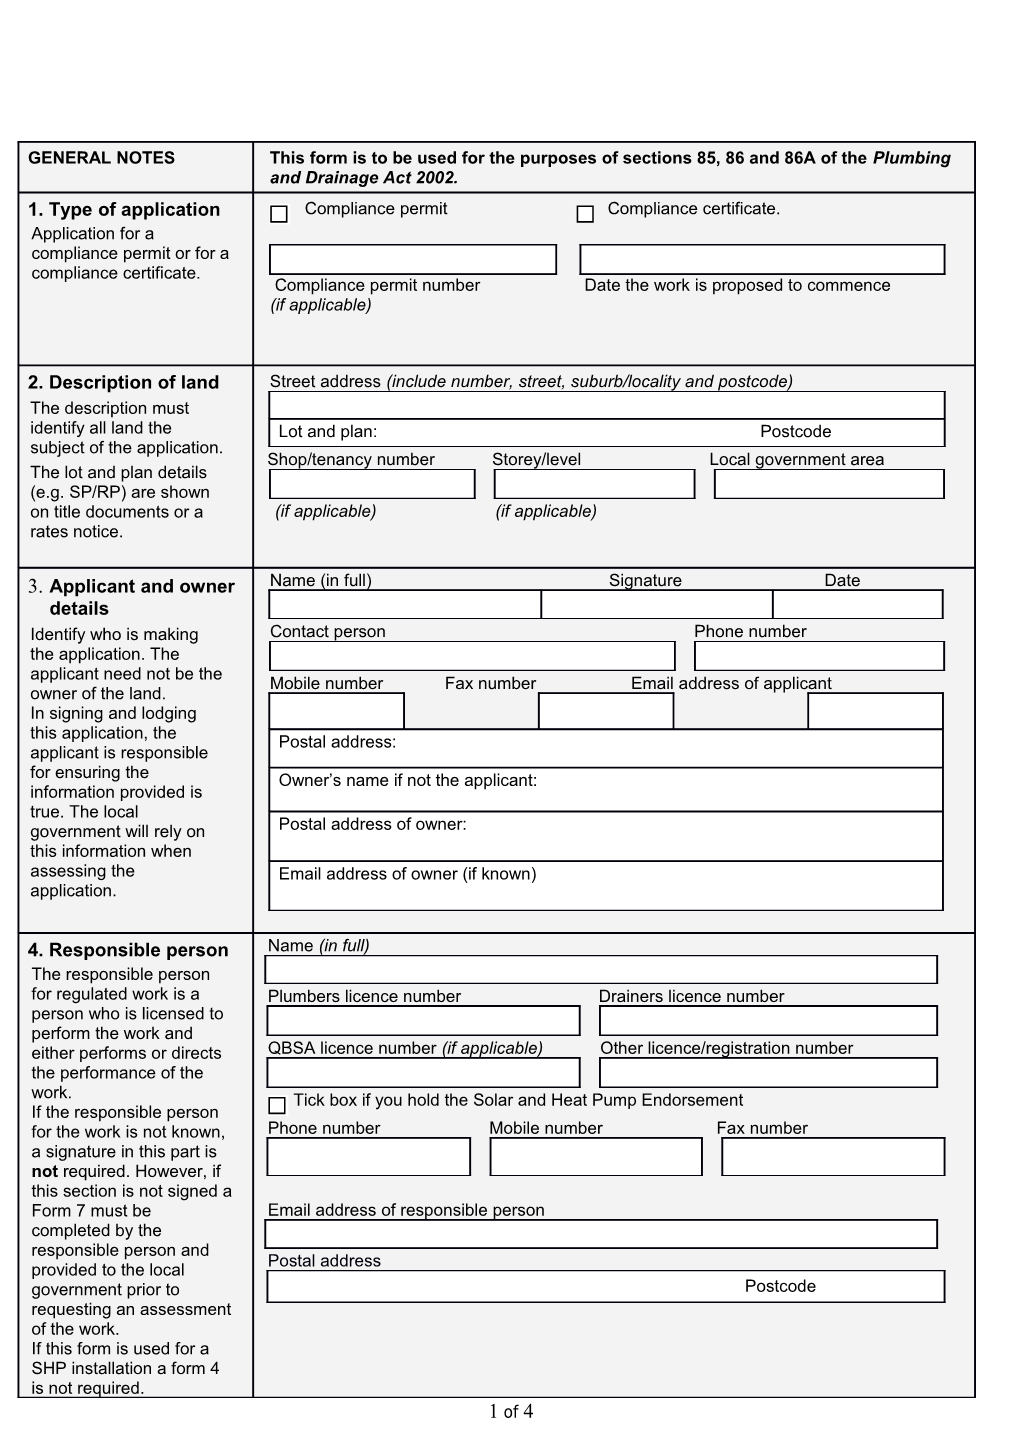 Compliance Assessment Application for Plumbing, Drainage and On-Site Sewerage Work